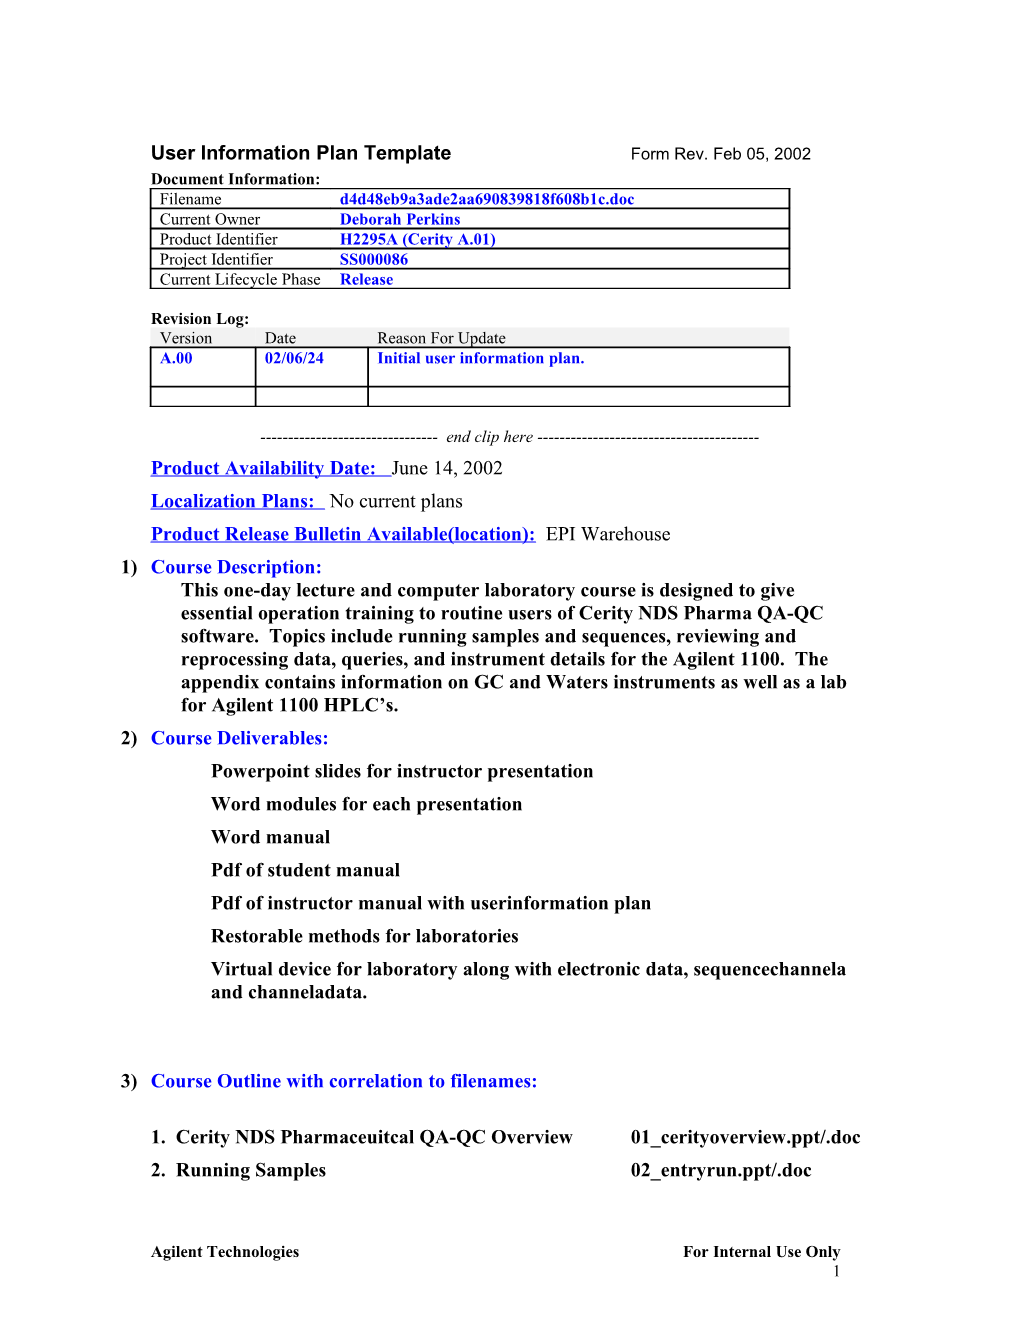 Cerity NDS Pharmaceutical QA-QC Routine Operation